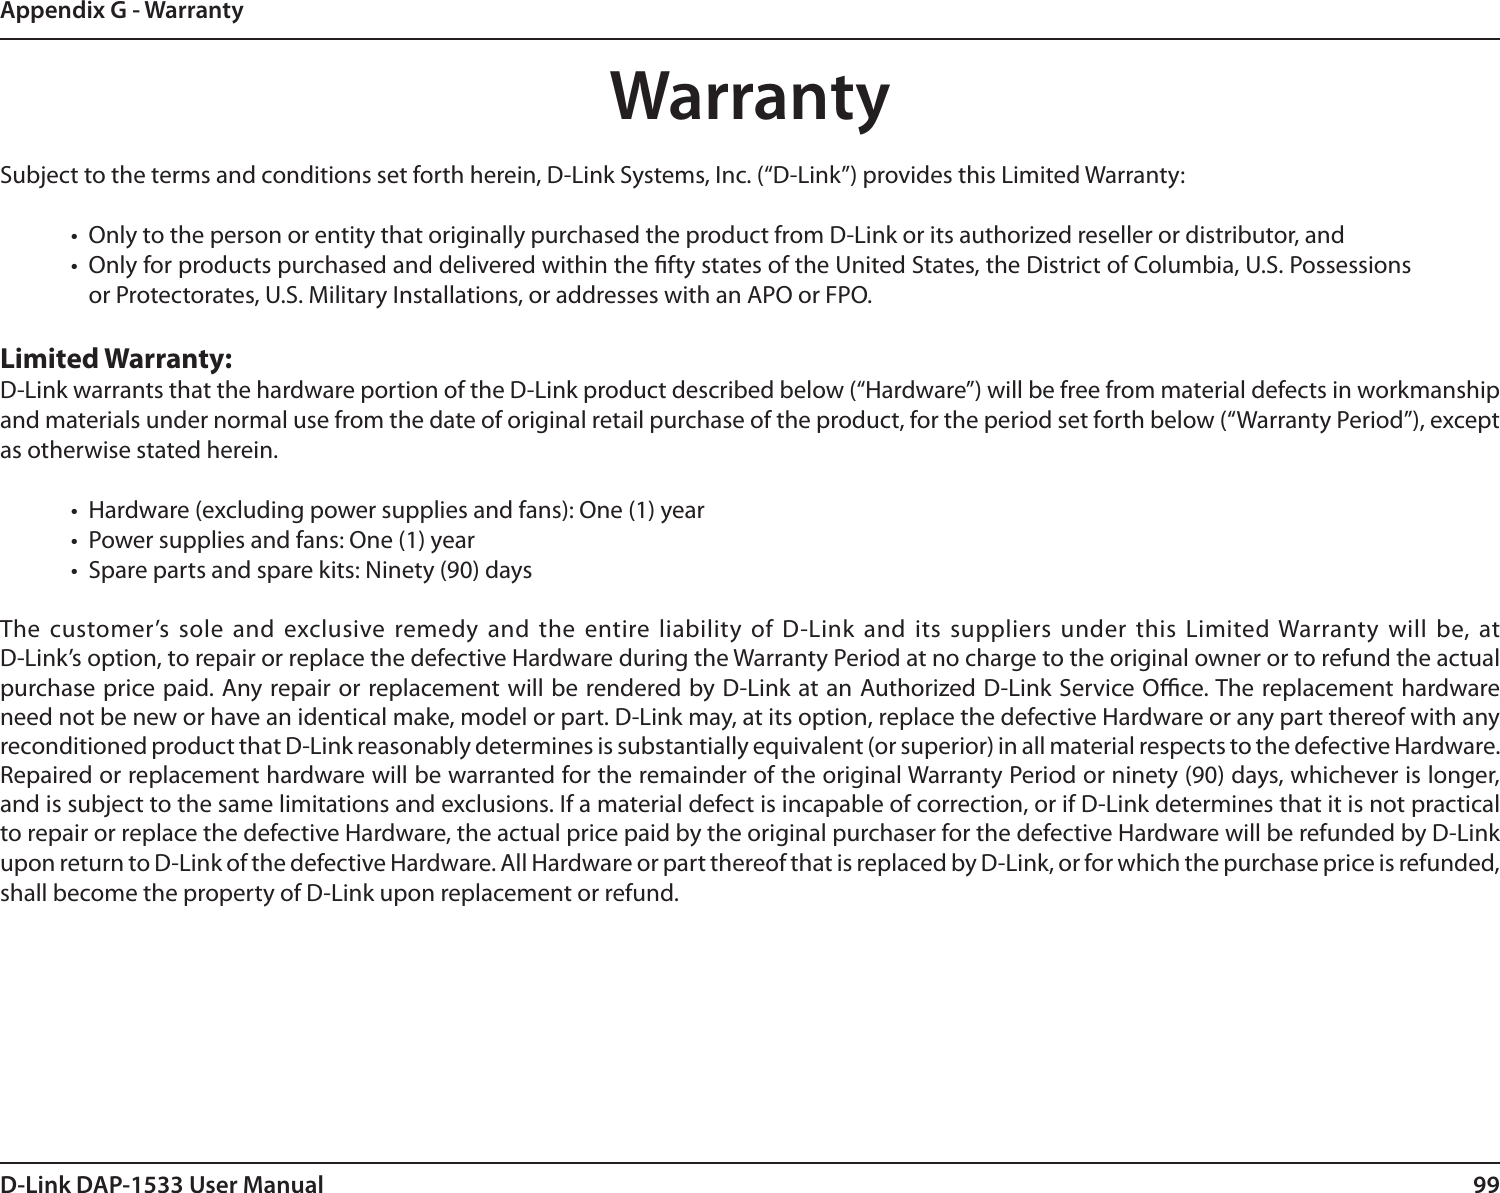 99D-Link DAP-1533 User ManualAppendix G - WarrantyWarrantySubject to the terms and conditions set forth herein, D-Link Systems, Inc. (“D-Link”) provides this Limited Warranty:•  Only to the person or entity that originally purchased the product from D-Link or its authorized reseller or distributor, and•  Only for products purchased and delivered within the fty states of the United States, the District of Columbia, U.S. Possessions or Protectorates, U.S. Military Installations, or addresses with an APO or FPO.Limited Warranty:D-Link warrants that the hardware portion of the D-Link product described below (“Hardware”) will be free from material defects in workmanship and materials under normal use from the date of original retail purchase of the product, for the period set forth below (“Warranty Period”), except as otherwise stated herein.•  Hardware (excluding power supplies and fans): One (1) year•  Power supplies and fans: One (1) year•  Spare parts and spare kits: Ninety (90) daysThe customer’s sole and exclusive remedy and  the entire liability  of  D-Link  and its suppliers  under this Limited Warranty will  be, at  D-Link’s option, to repair or replace the defective Hardware during the Warranty Period at no charge to the original owner or to refund the actual purchase price paid. Any repair or replacement will  be rendered by D-Link at an Authorized D-Link Service Oce. The replacement hardware need not be new or have an identical make, model or part. D-Link may, at its option, replace the defective Hardware or any part thereof with any reconditioned product that D-Link reasonably determines is substantially equivalent (or superior) in all material respects to the defective Hardware. Repaired or replacement hardware will be warranted for the remainder of the original Warranty Period or ninety (90) days, whichever is longer, and is subject to the same limitations and exclusions. If a material defect is incapable of correction, or if D-Link determines that it is not practical to repair or replace the defective Hardware, the actual price paid by the original purchaser for the defective Hardware will be refunded by D-Link upon return to D-Link of the defective Hardware. All Hardware or part thereof that is replaced by D-Link, or for which the purchase price is refunded, shall become the property of D-Link upon replacement or refund.